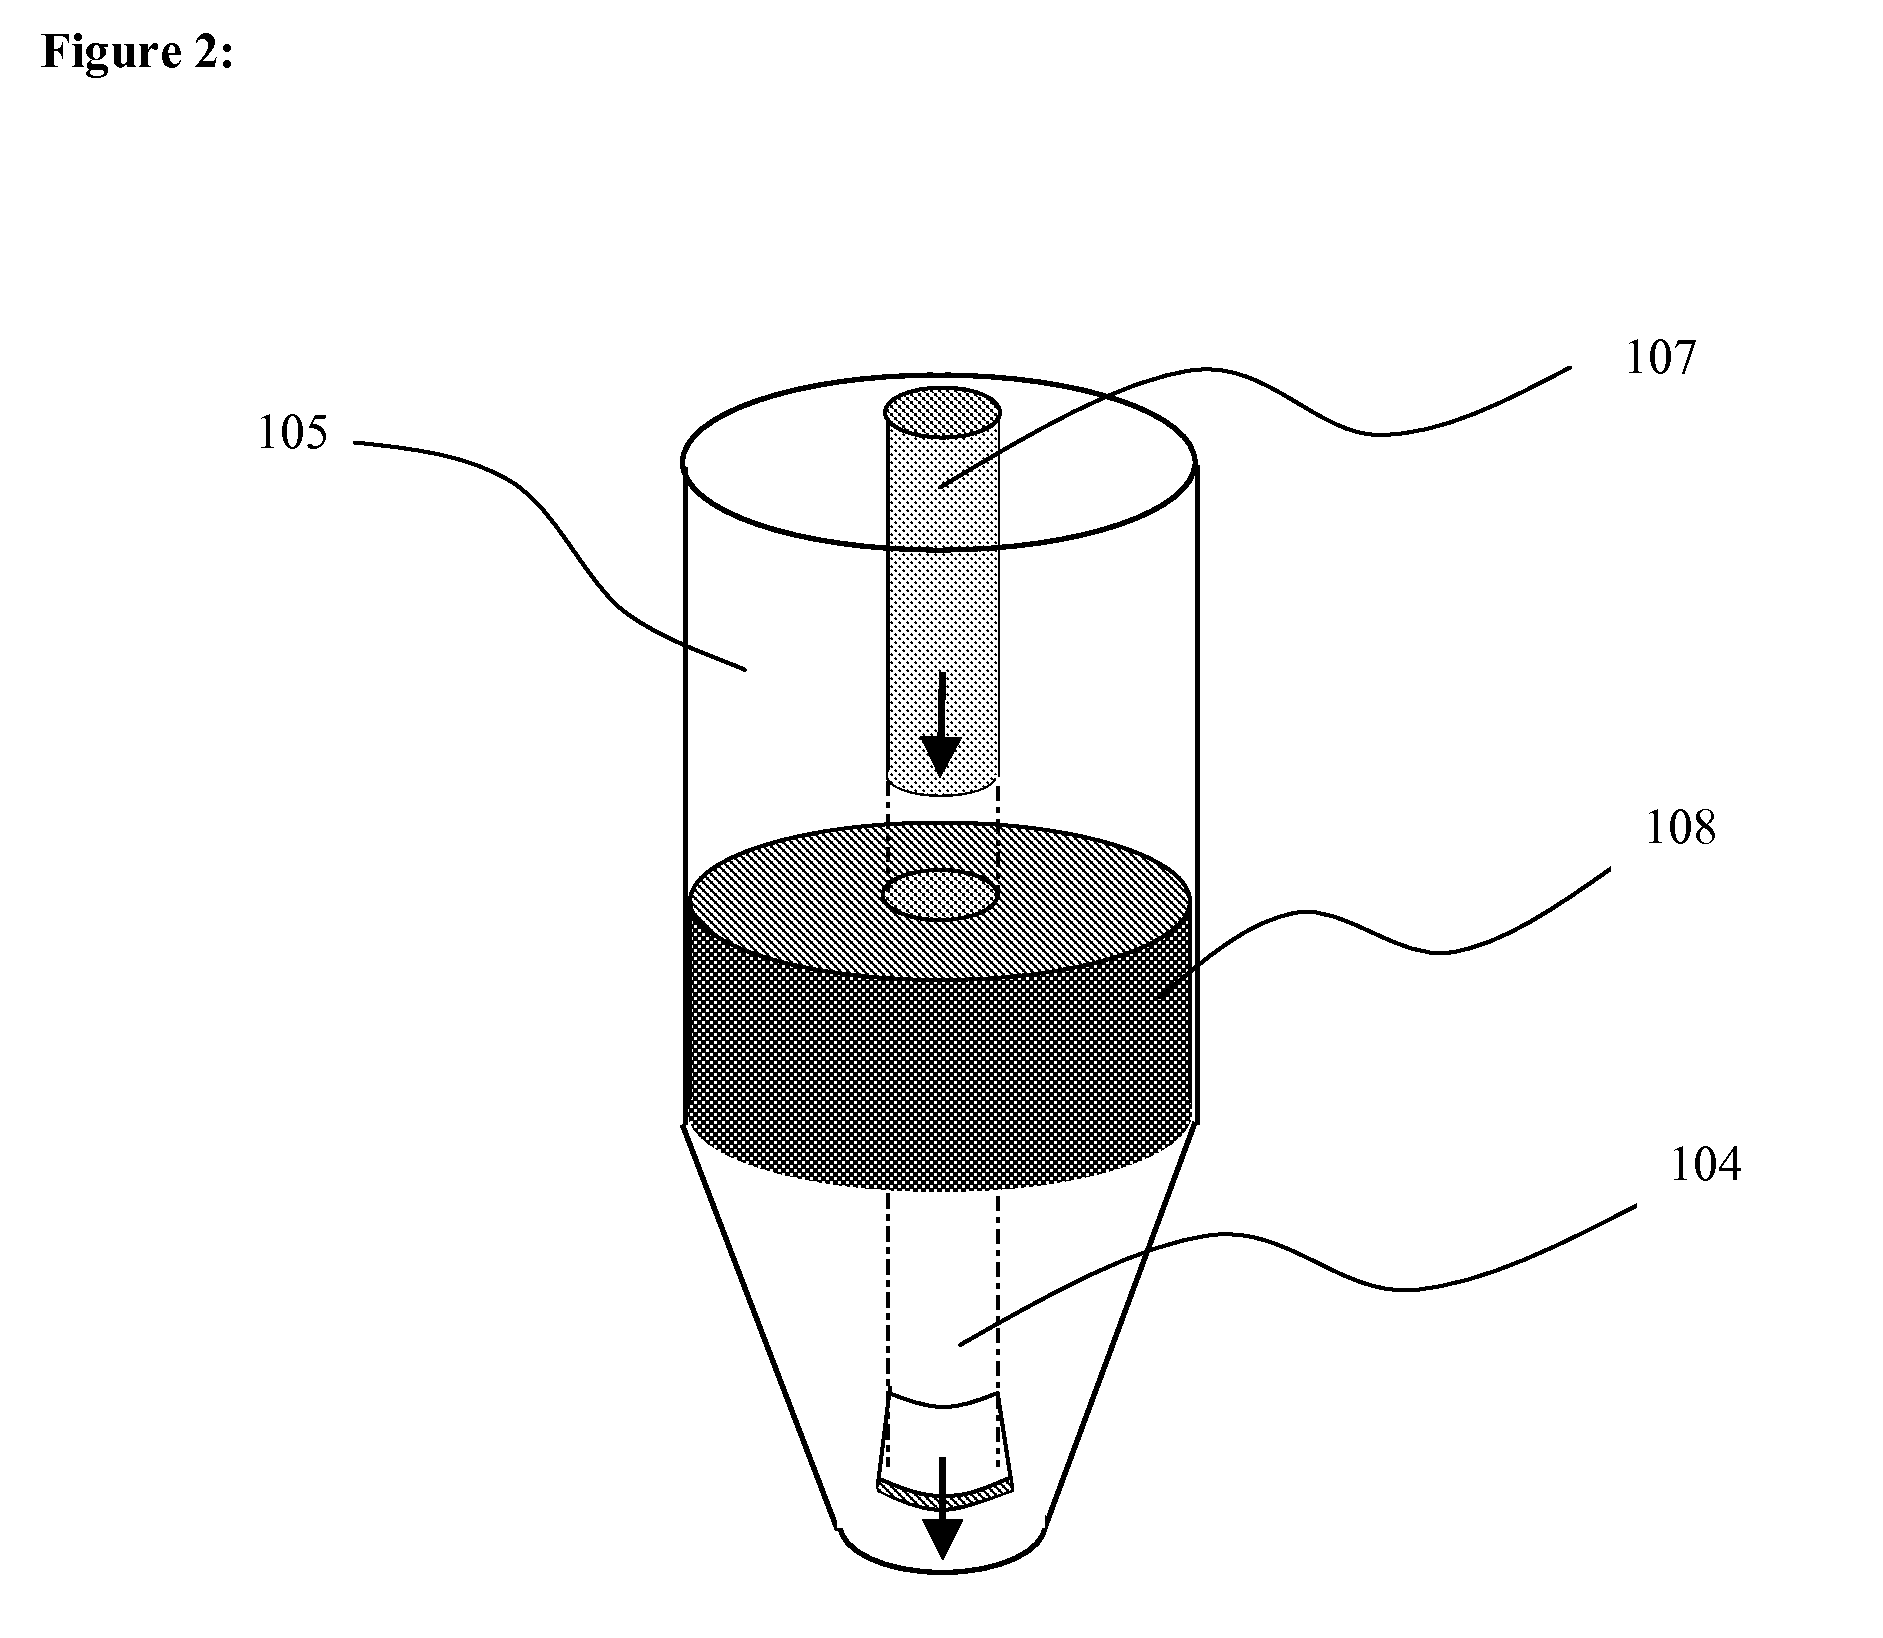 Method of contactless magnetic electroporation